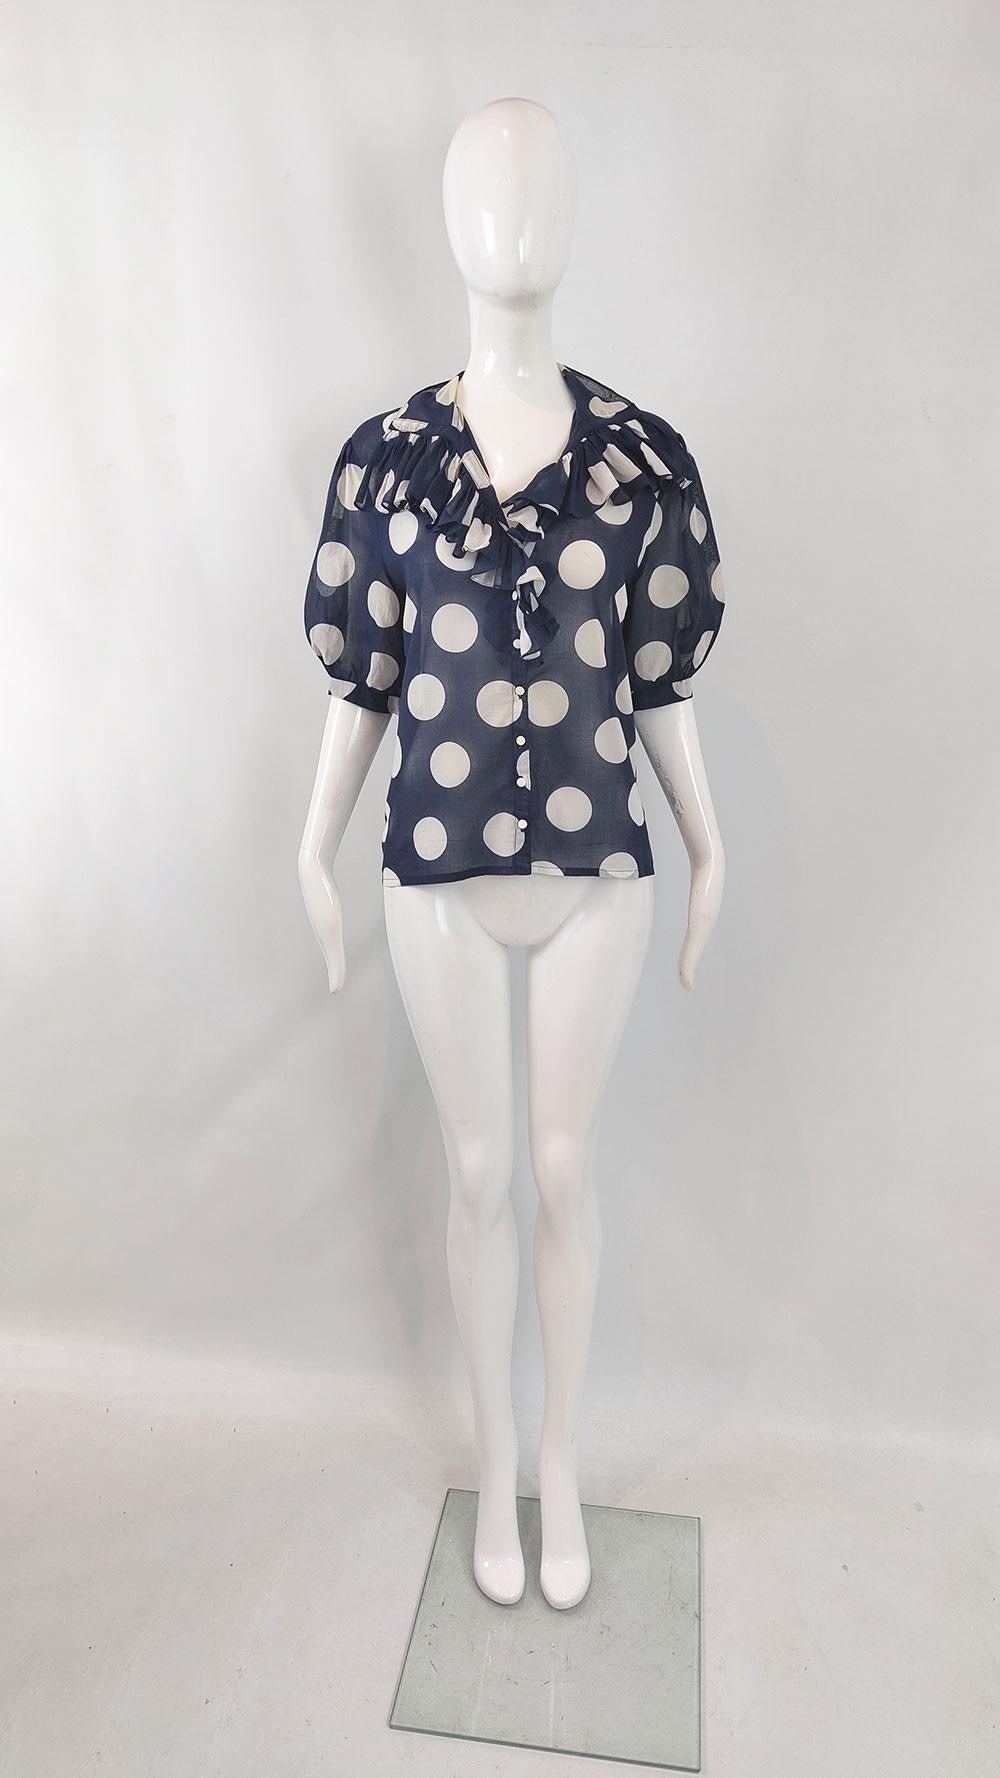 A charming 80s vintage blouse by designer Jean Dessés. Made from sheer navy cotton voile with oversized cream polka dots, it boasts puff sleeves and a frilly collar for a playful look. Jean Dessés, a celebrated designer, was linked with Valentino